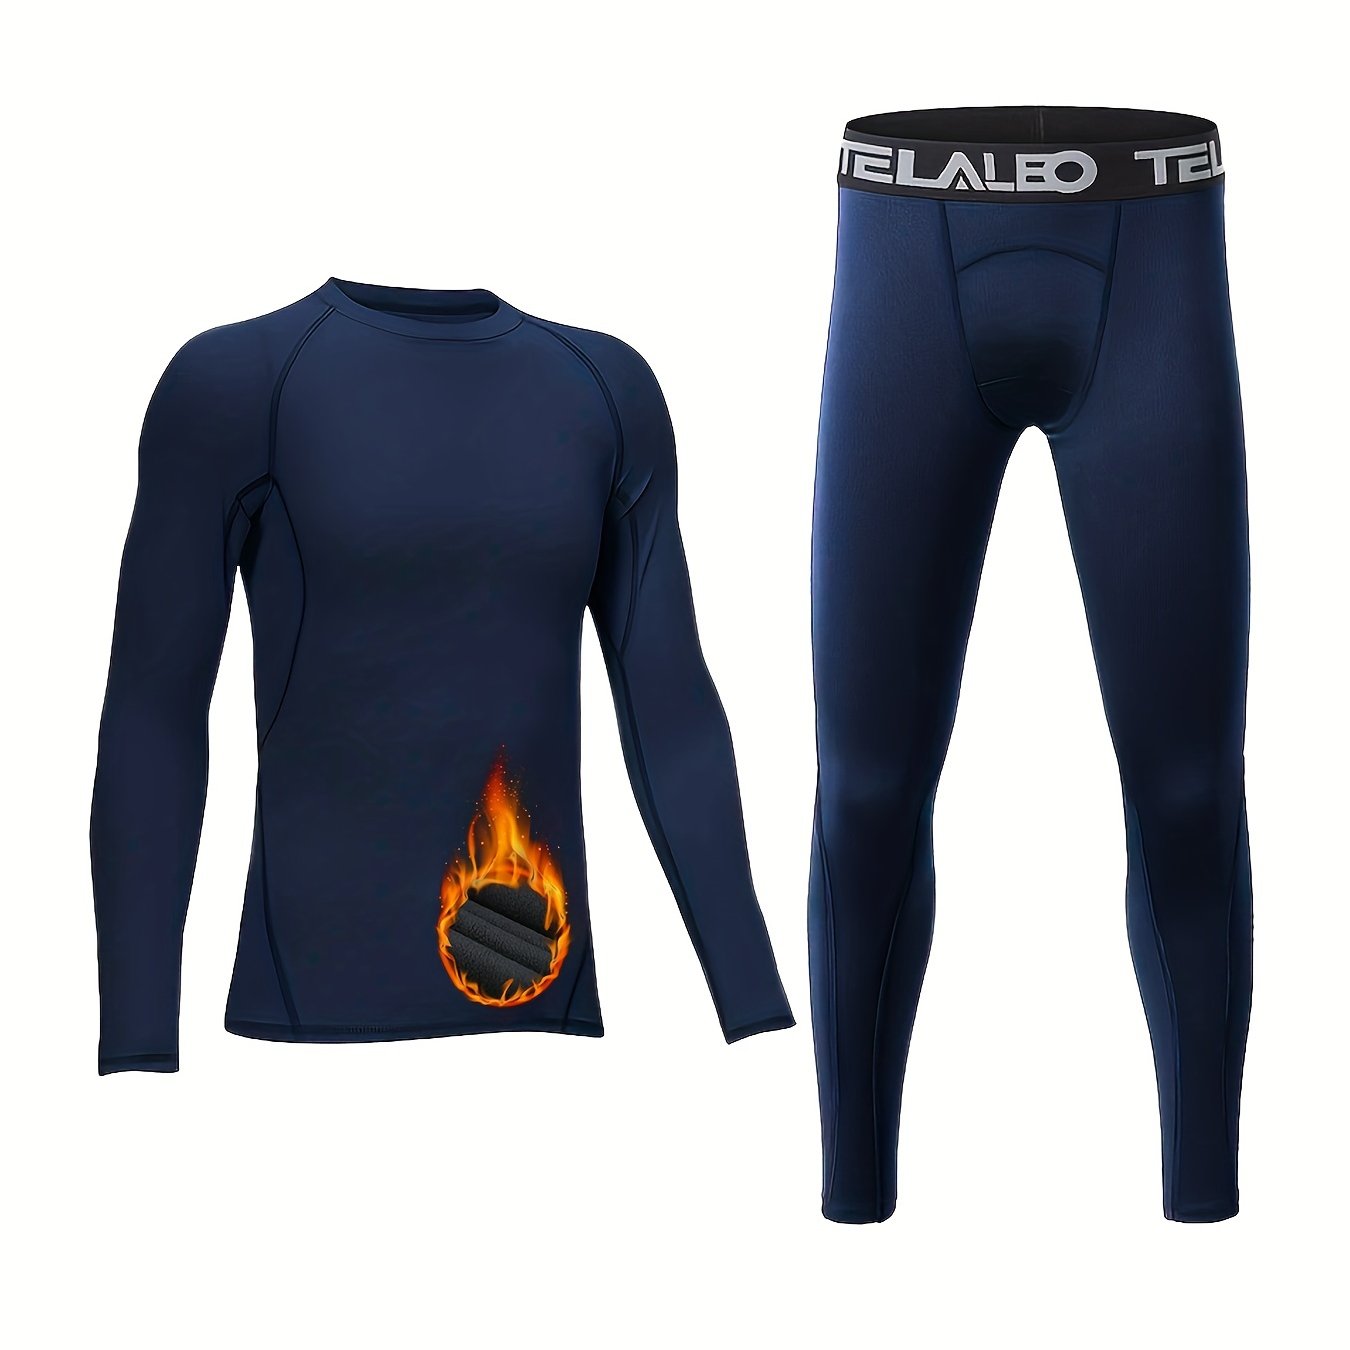  TELALEO Boys Thermal Compression Leggings Pants Youth Fleece  Lined Base Layer Tights Cold Weather Heat Gear